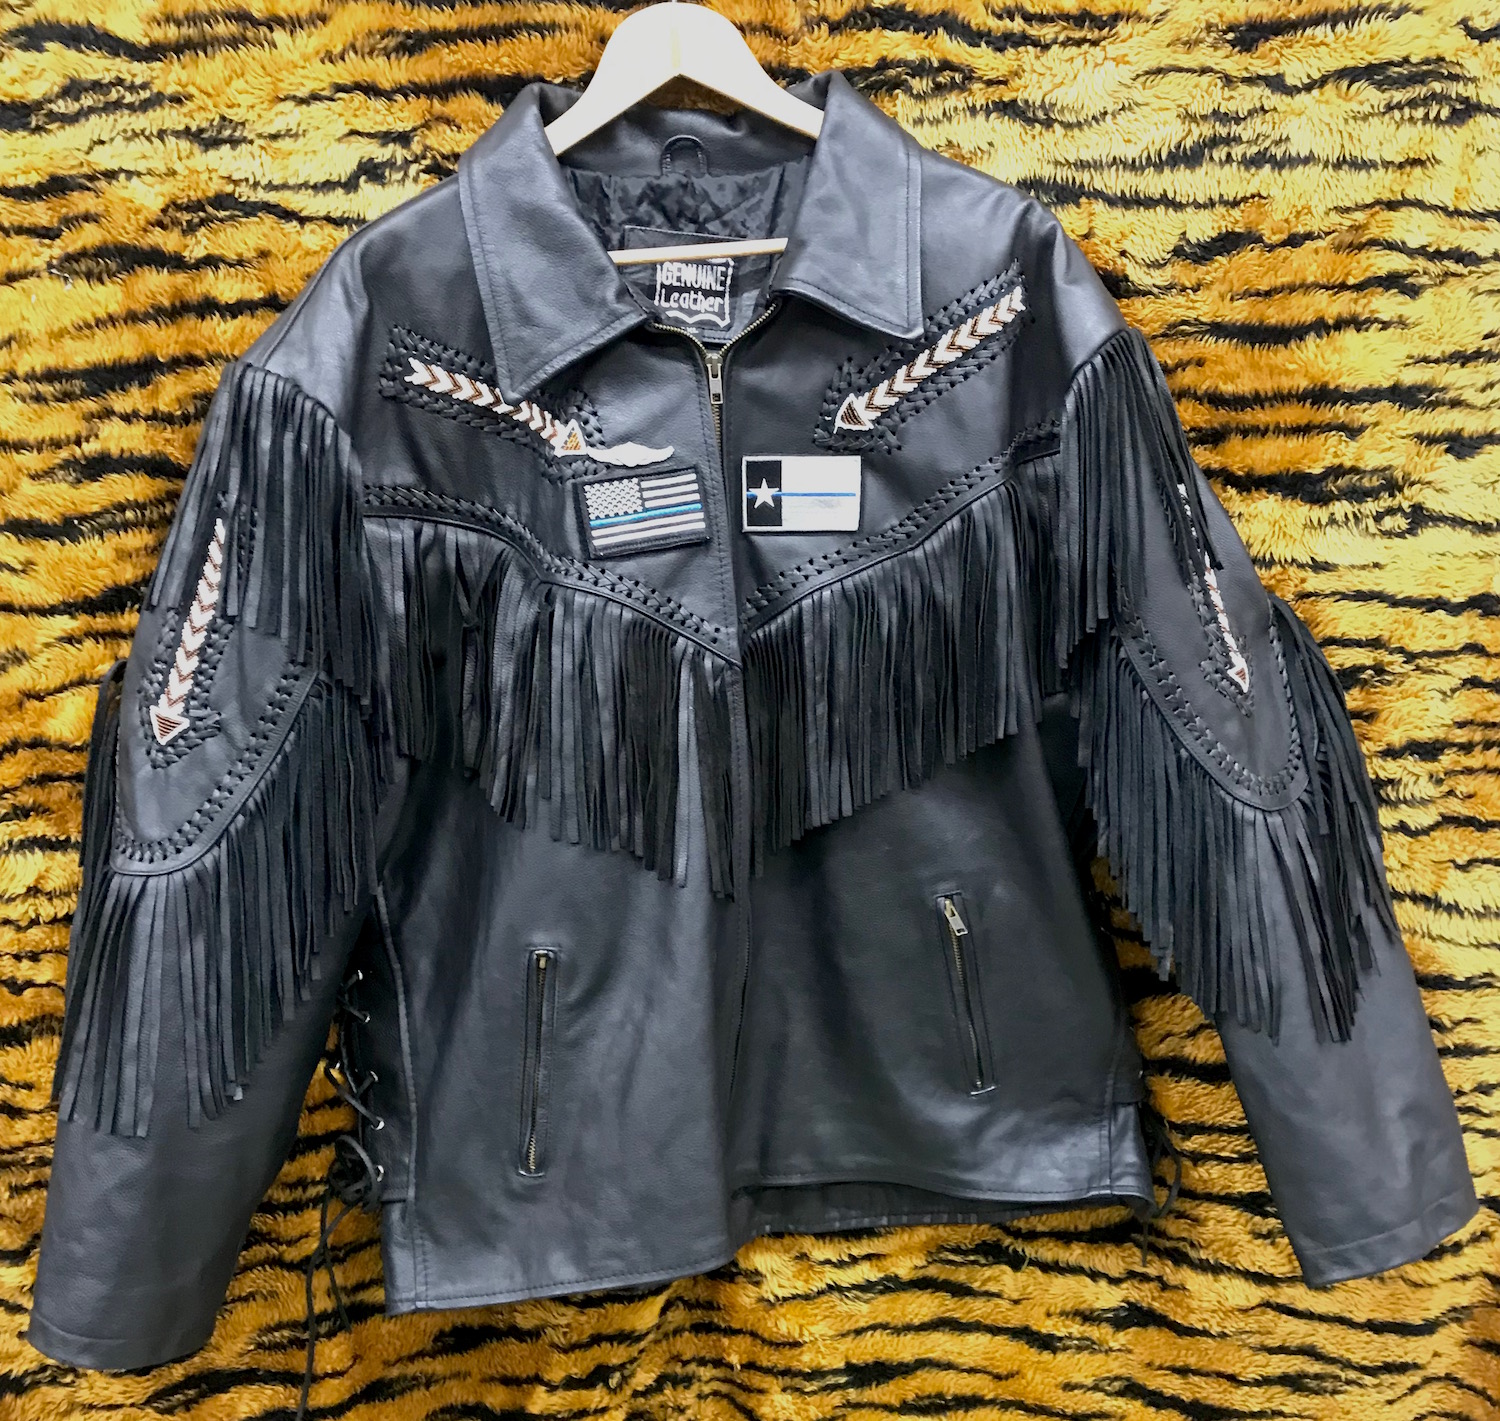 COWBOY Year of the Tiger Leather jacket